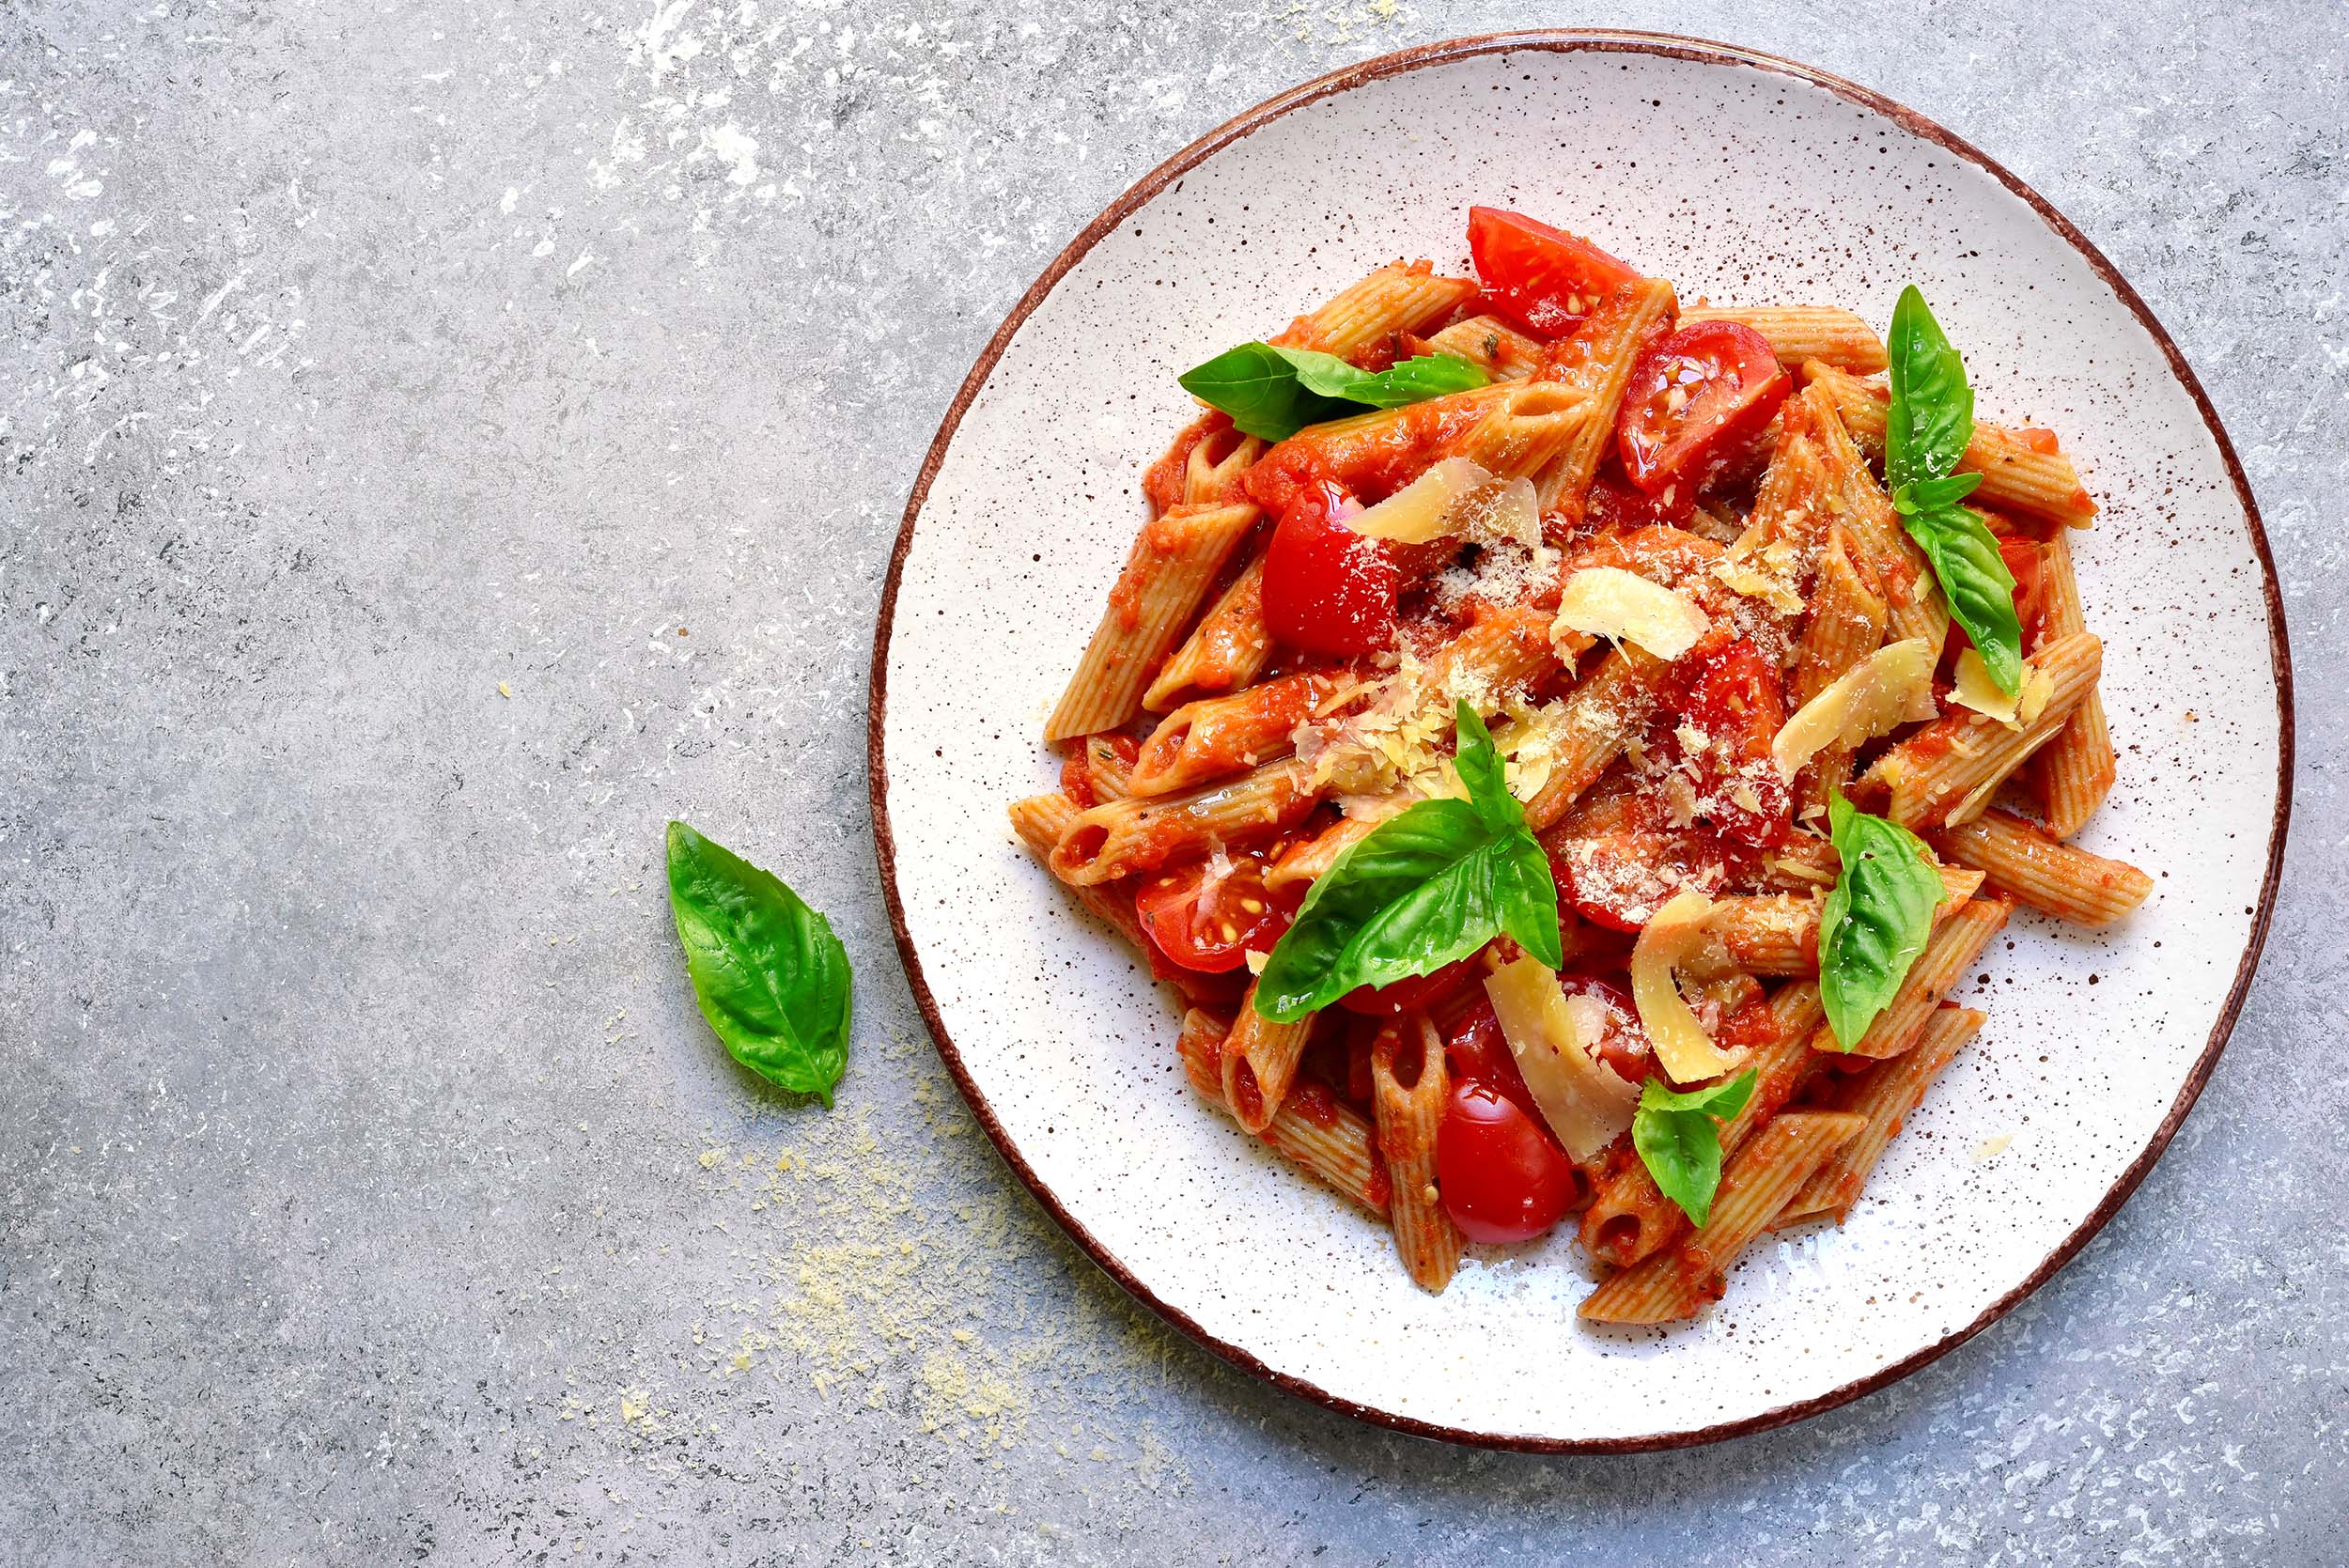 Penne pasta with tomato in red sauce.